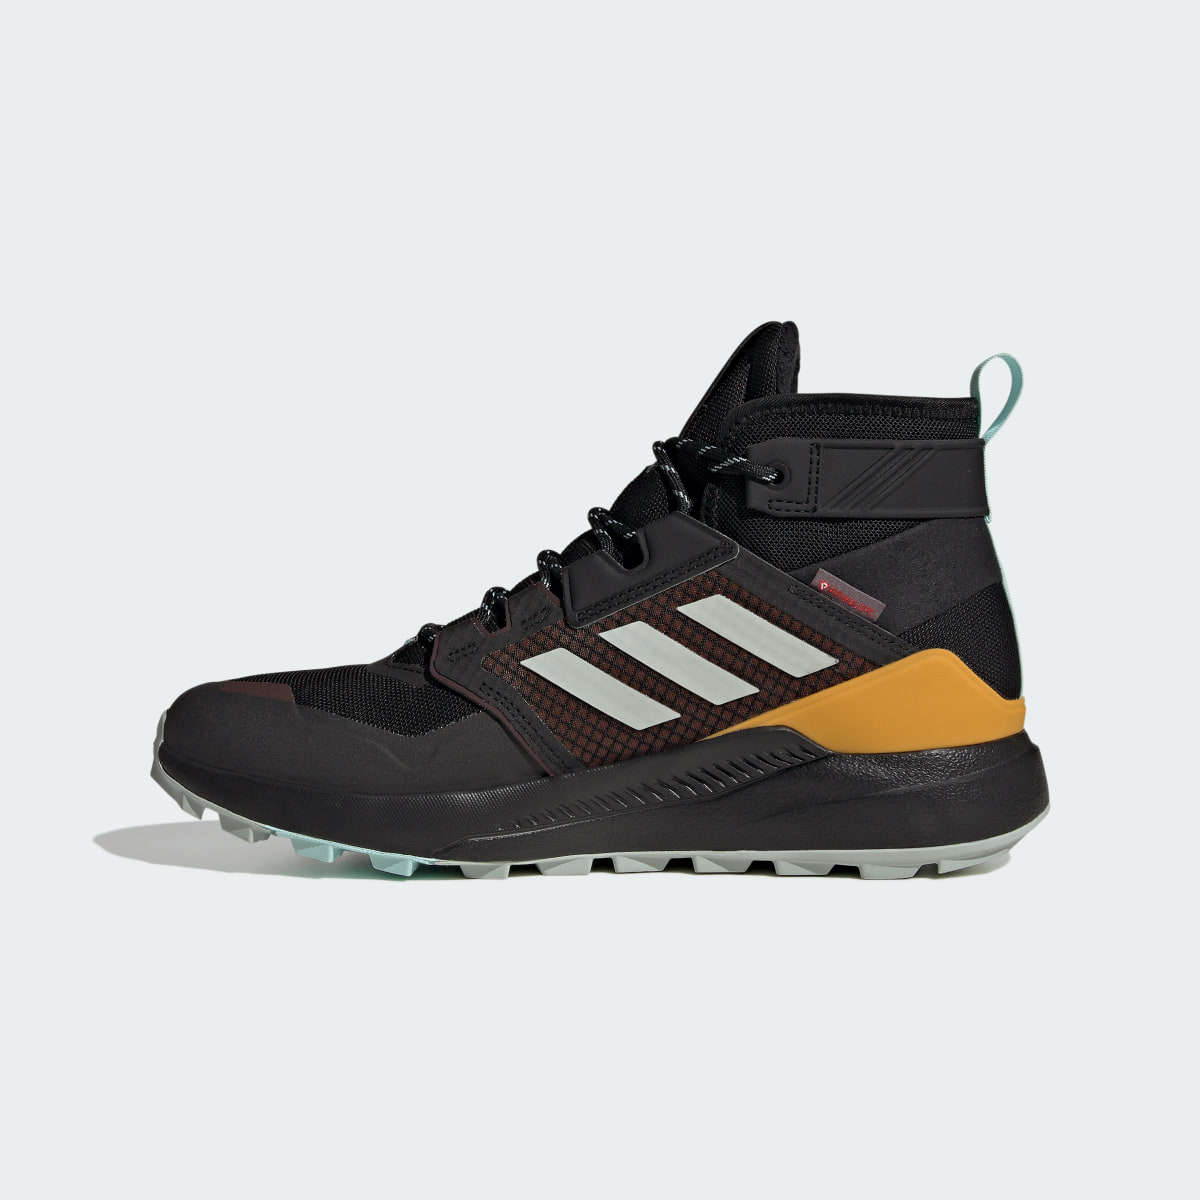 Adidas Terrex Trailmaker Mid COLD.RDY Hiking Boots. 7